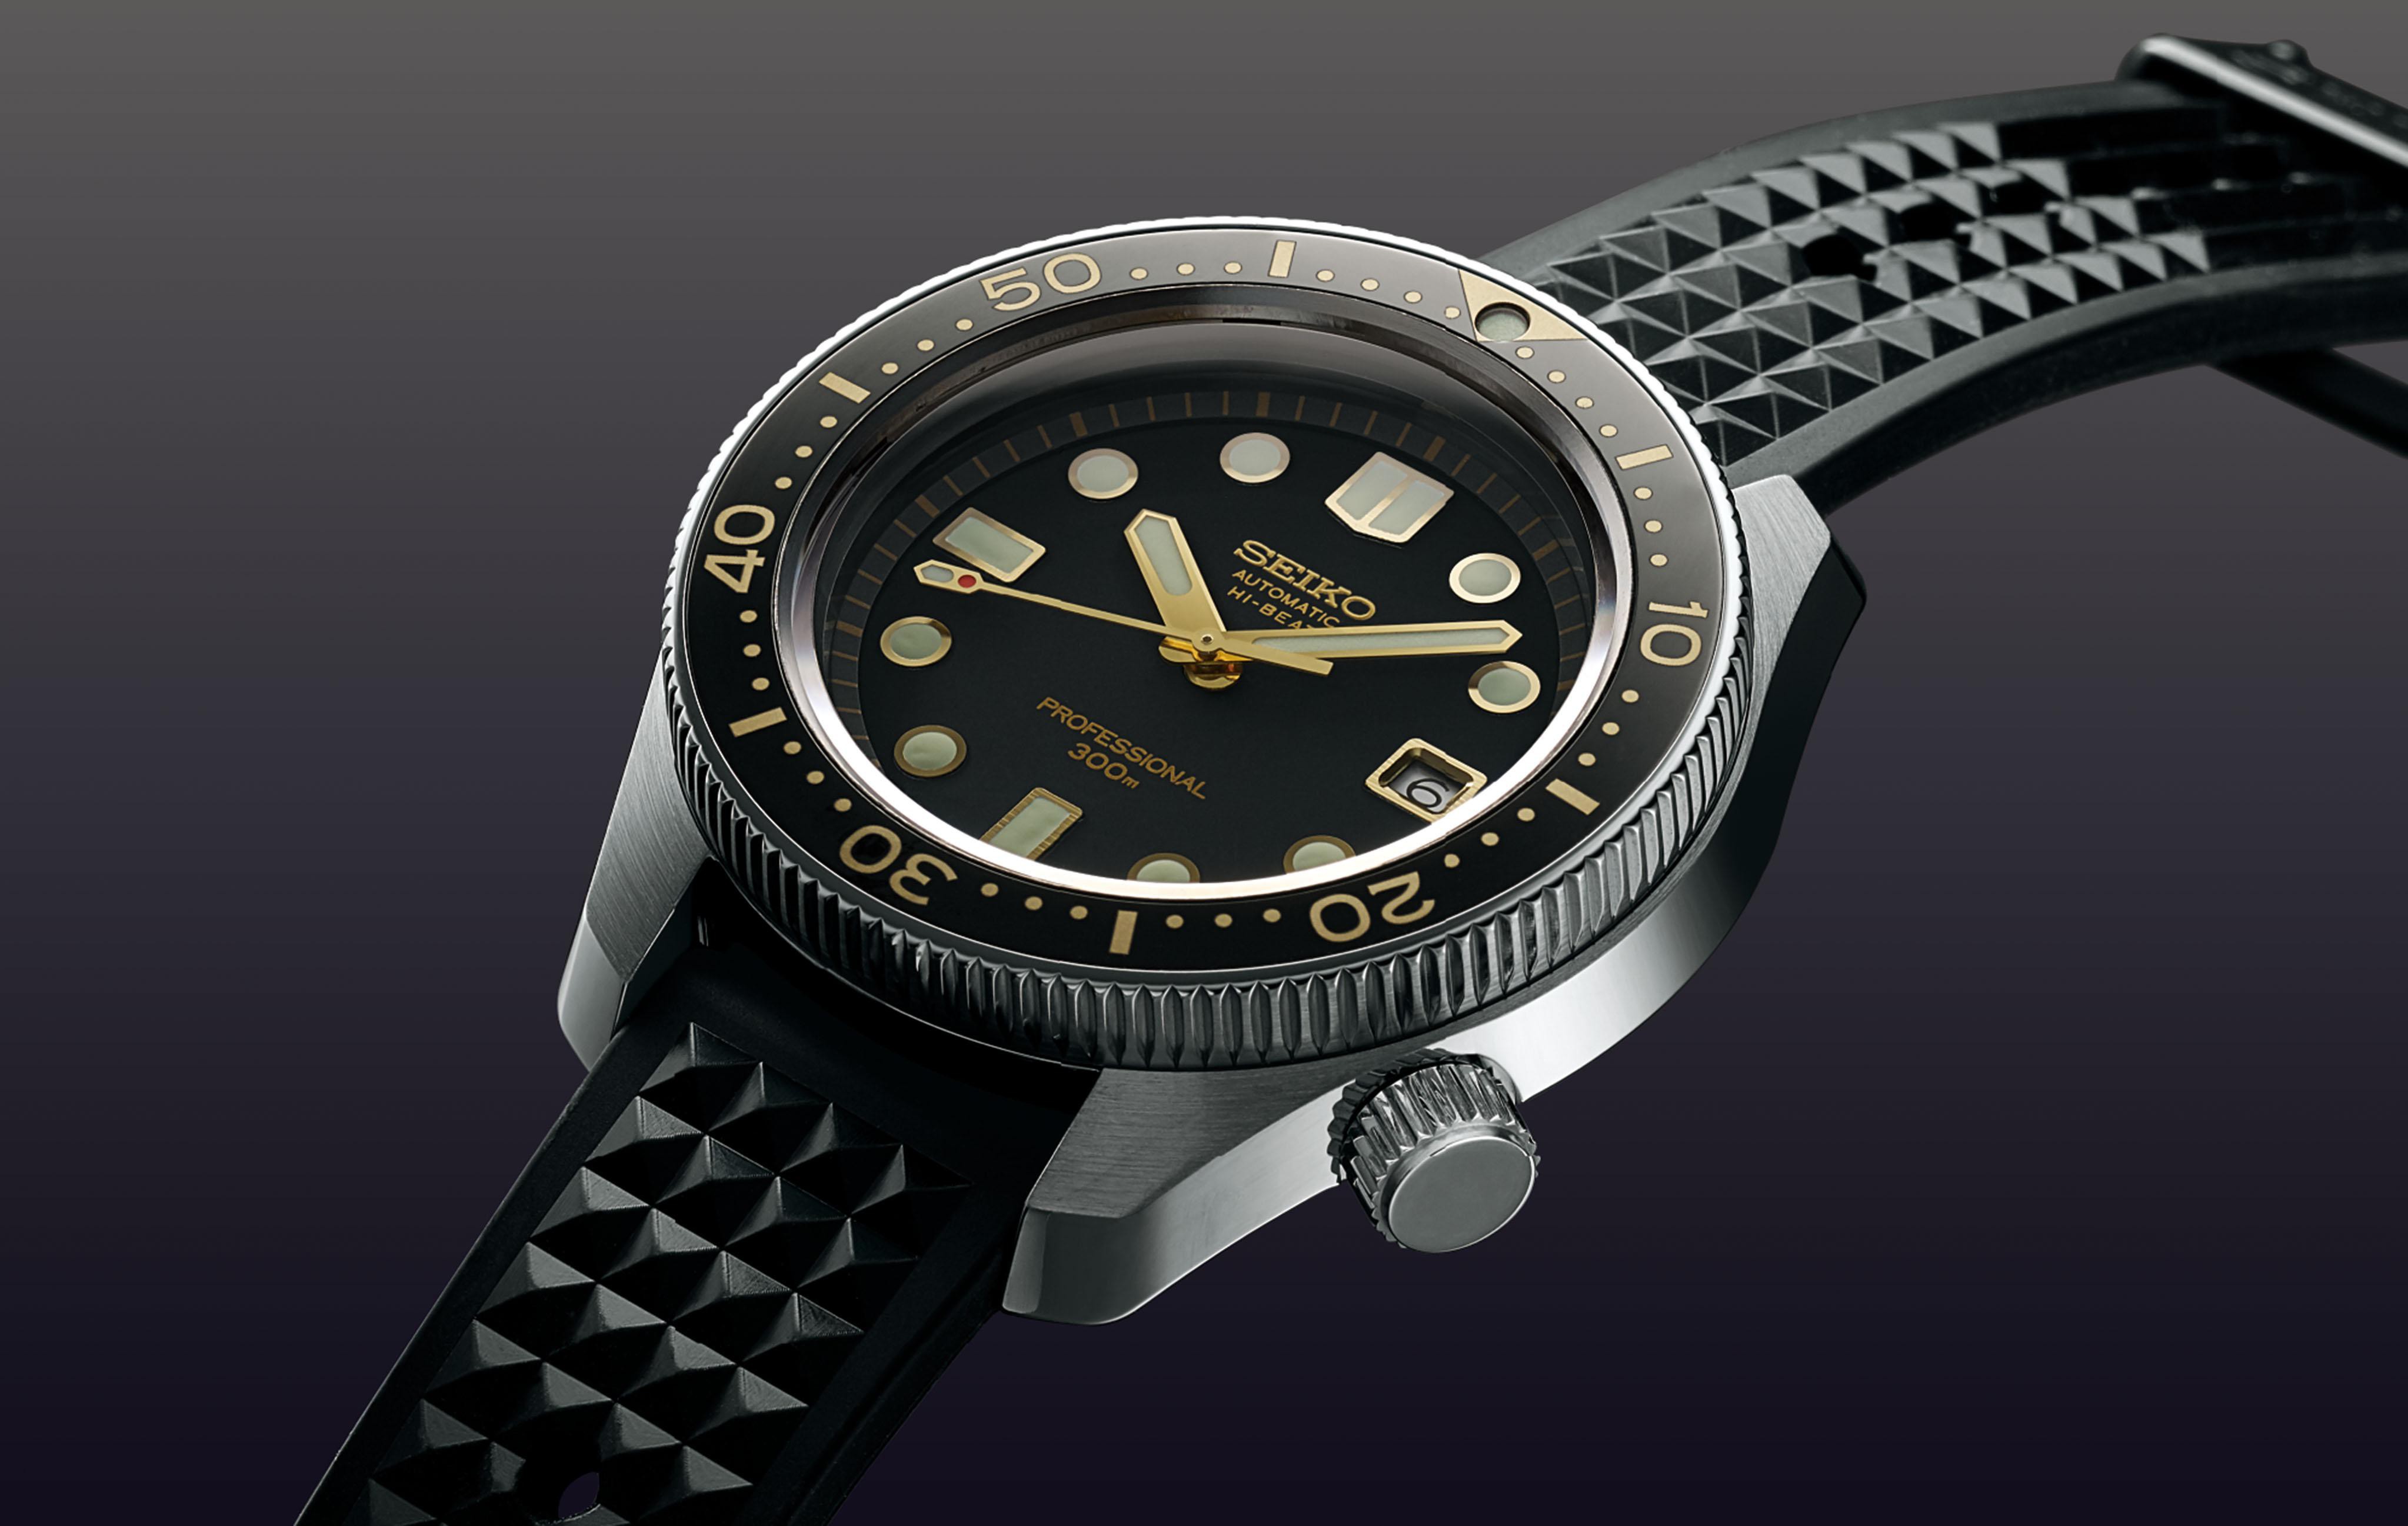 Seiko's expertise diver's is celebrated in new Prospex collection | Seiko Watch Corporation